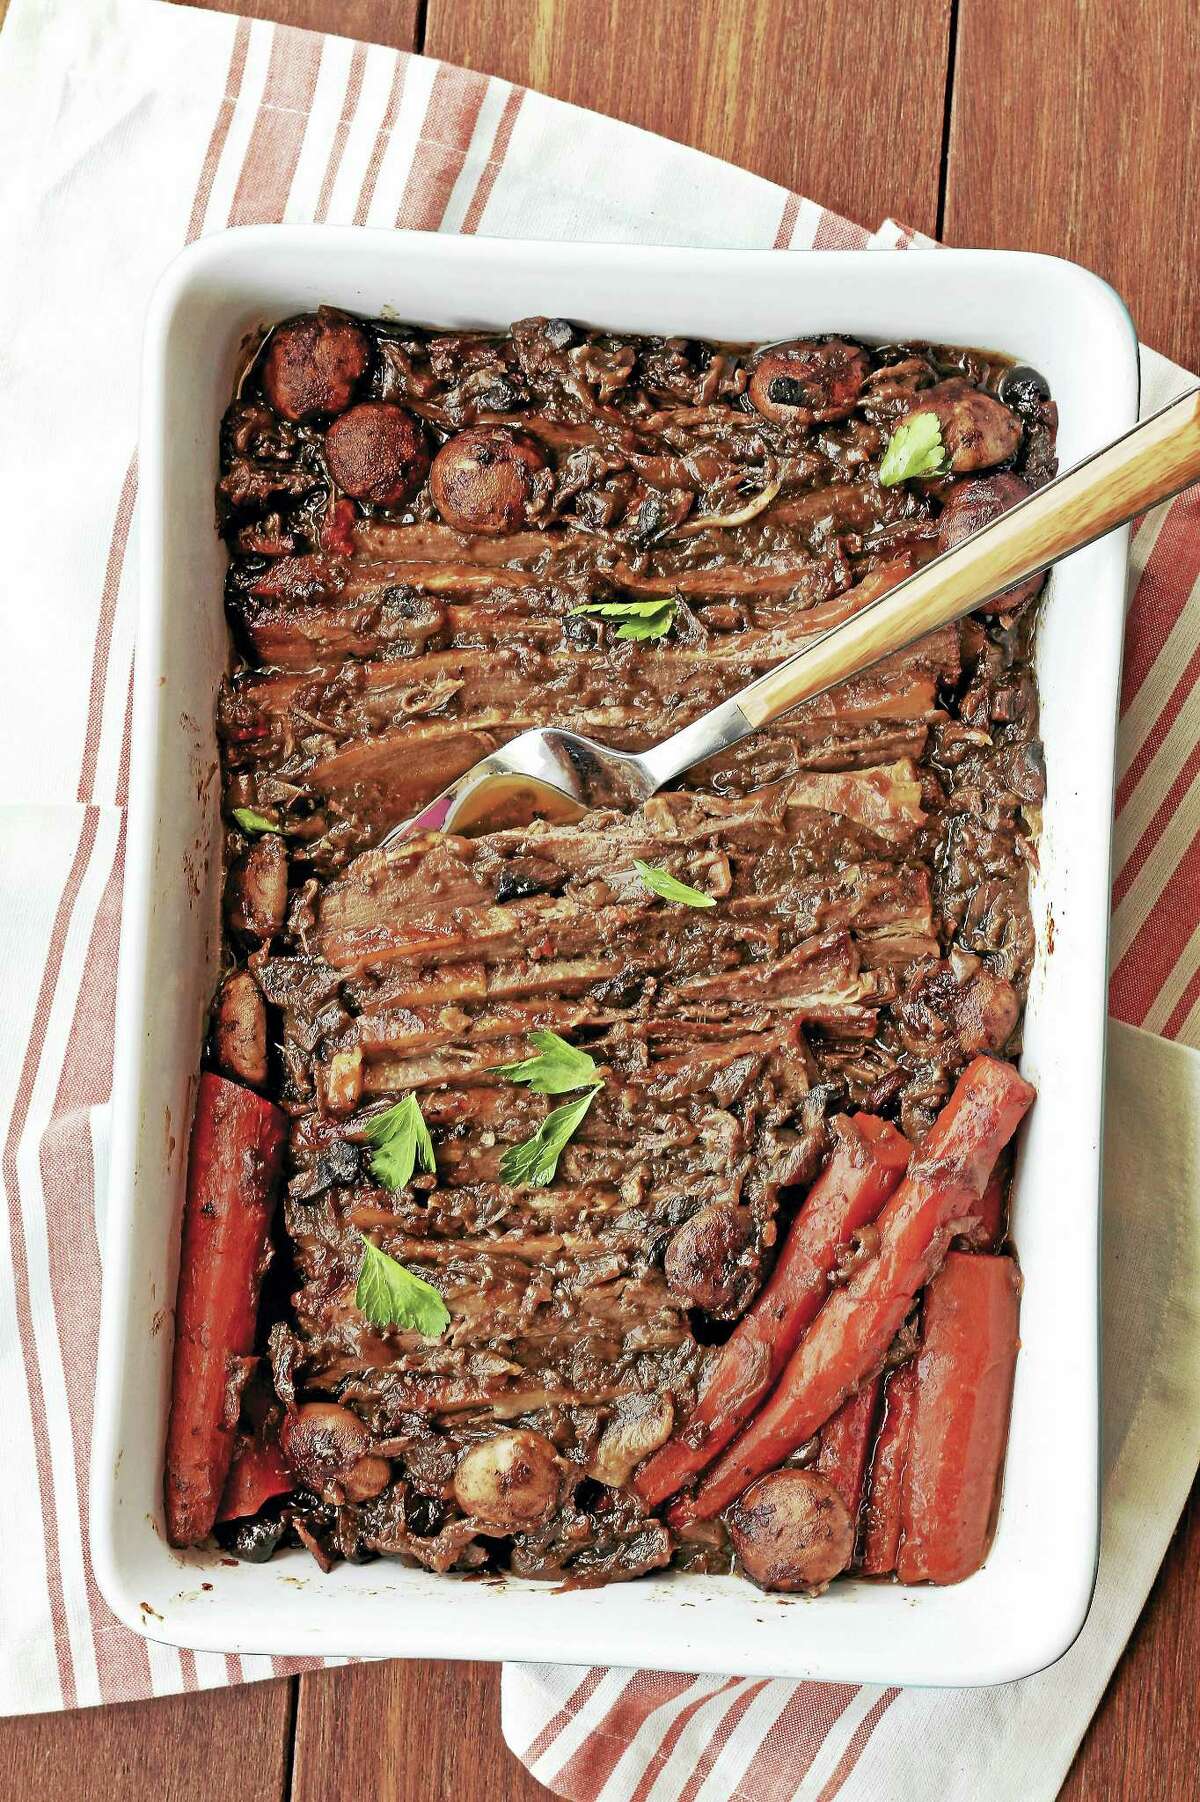 Brisket with onions and porcini mushrooms is a traditional Jewish holiday dish.